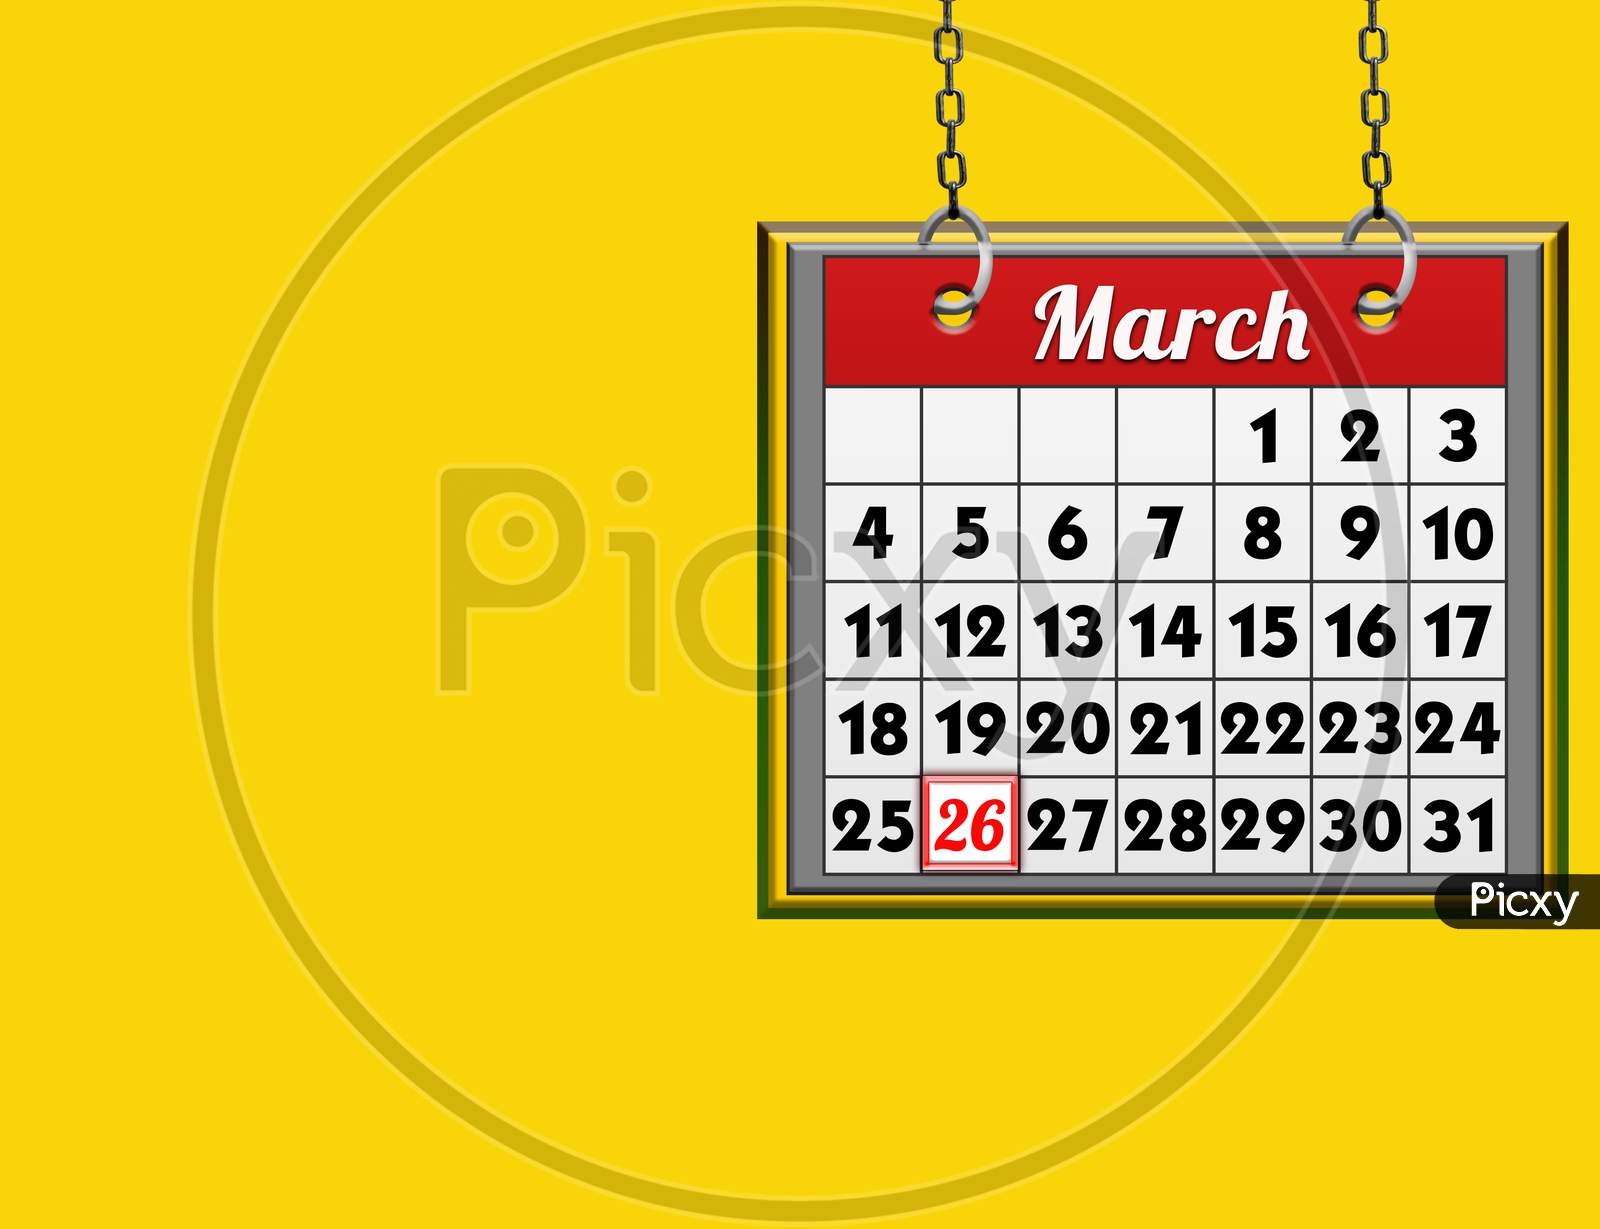 March 26 Calendar, On Yellow Background